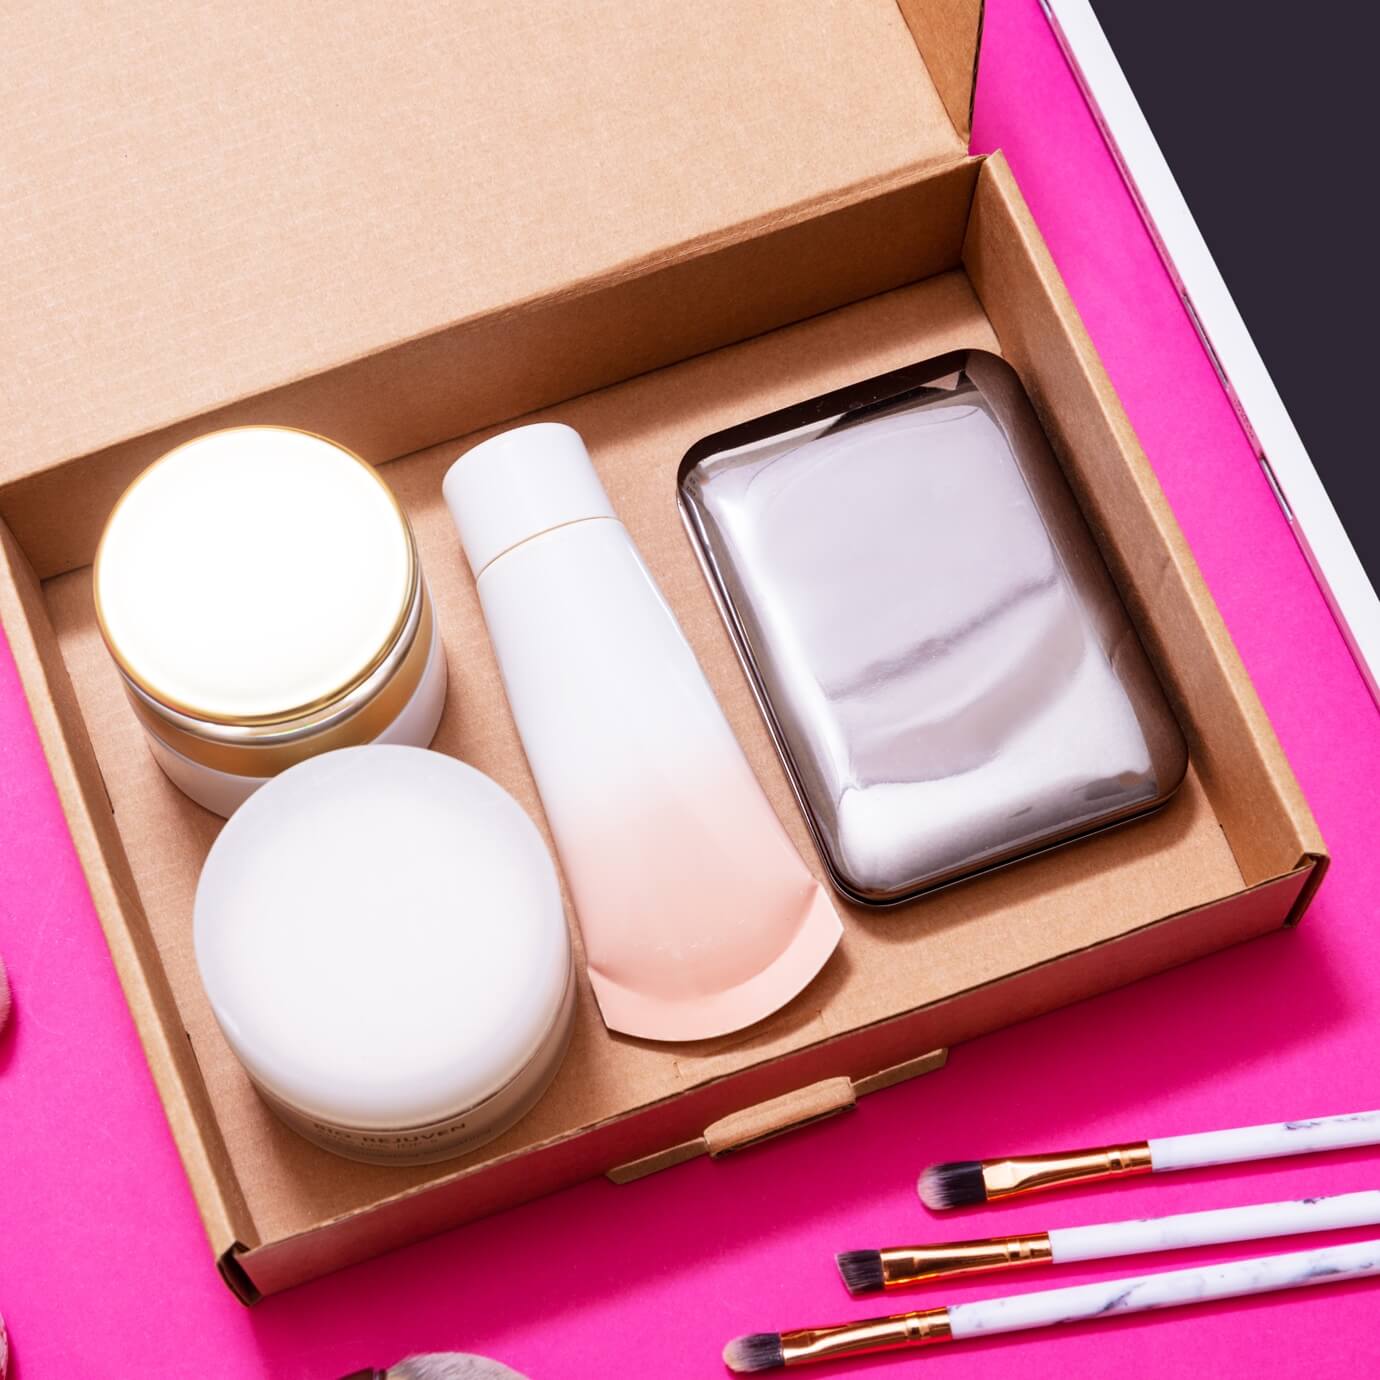 image corrugated box holding beauty products on neon pink table thumbnail